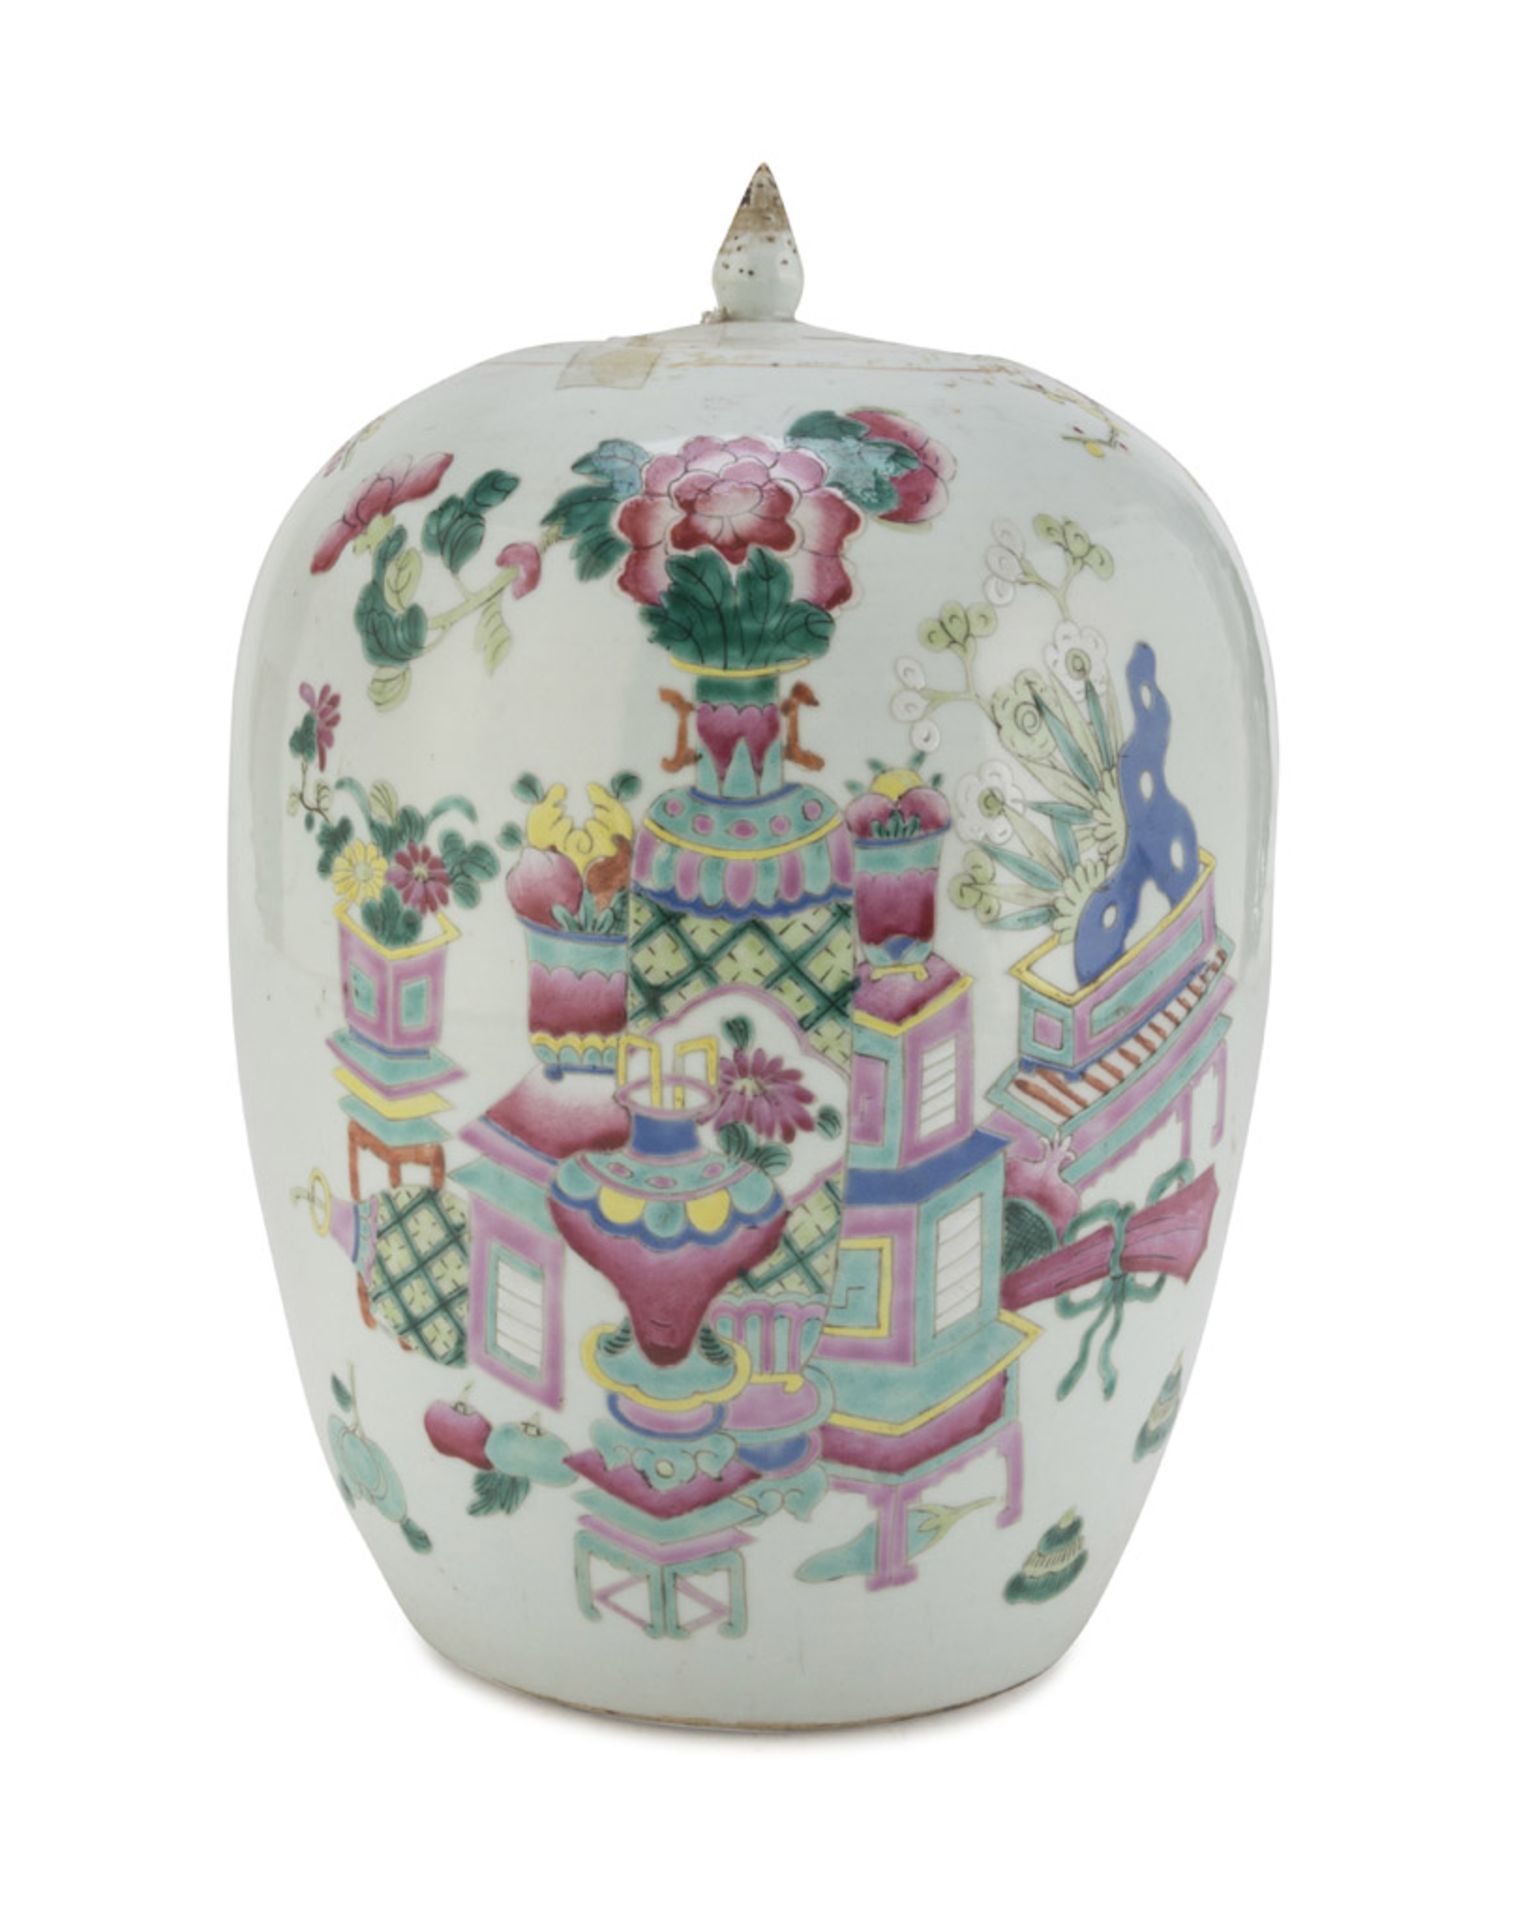 POLYCHROME ENAMELLED PORCELAIN POTICHE, CHINA 19TH CENTURY decorated with peacock, big peonies and